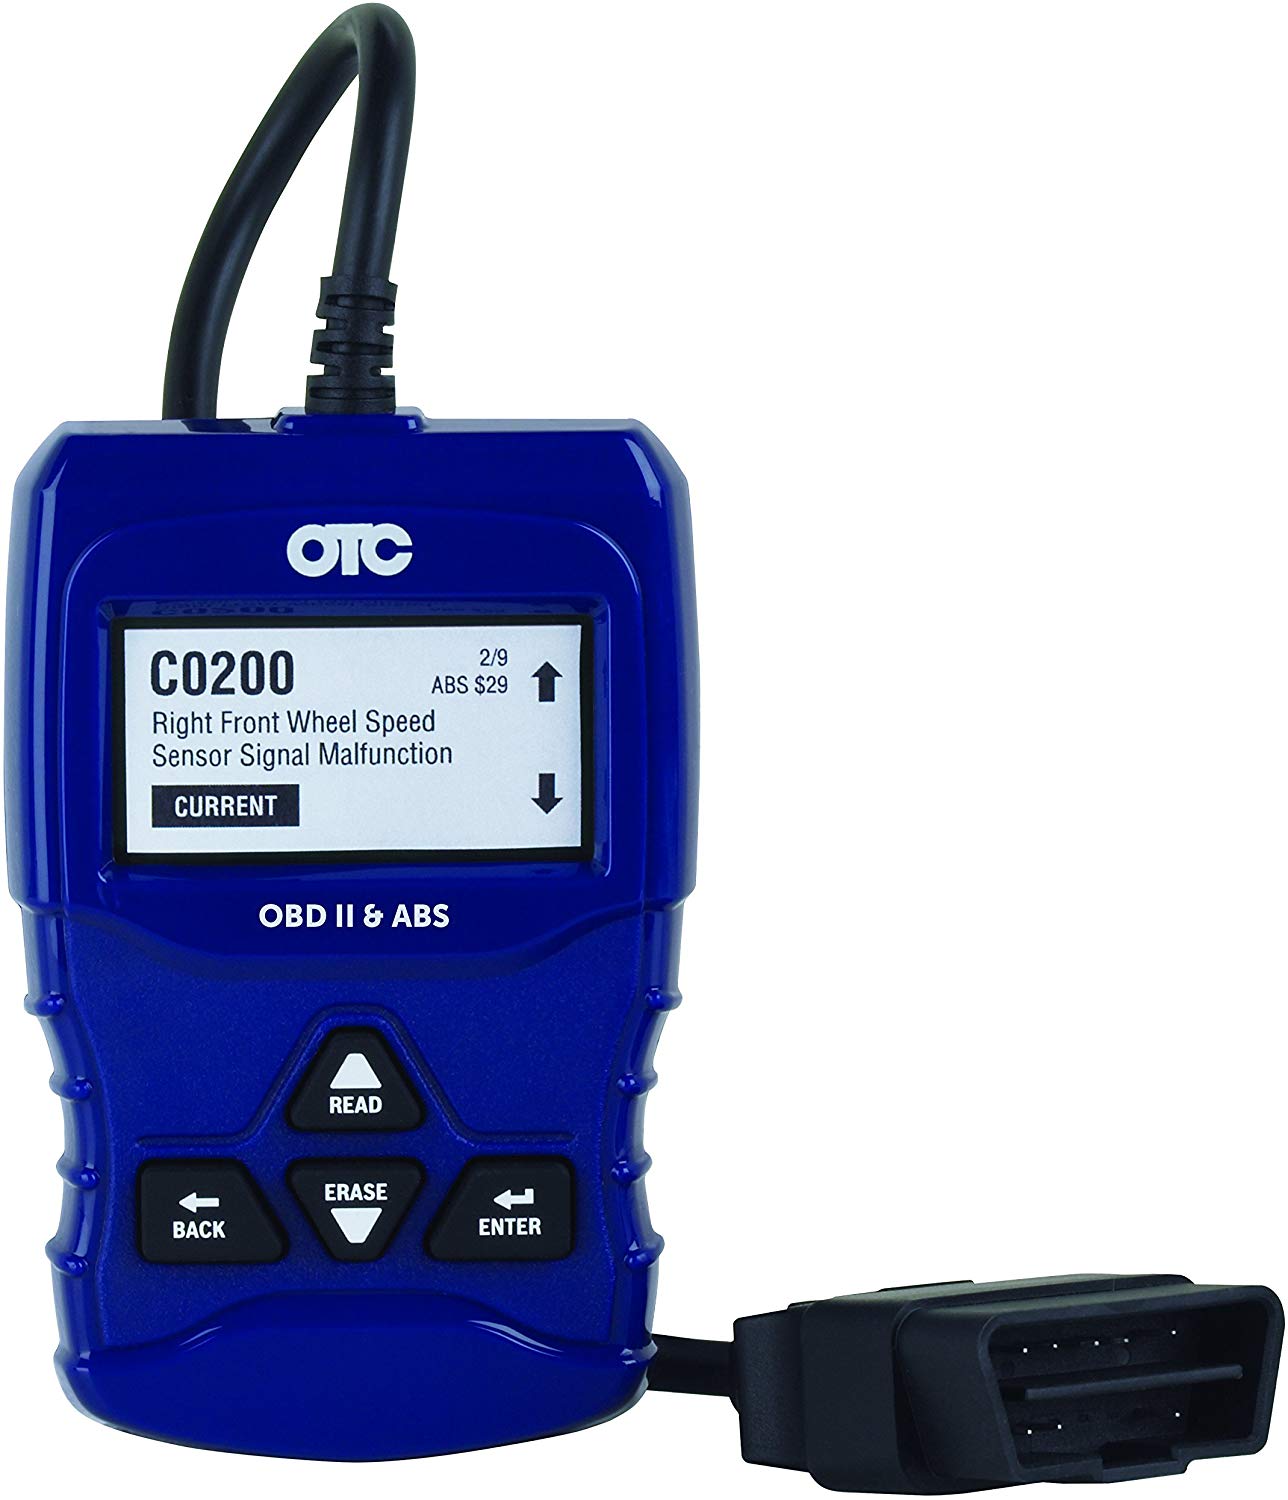 OTC Tools 3208 OBD II & ABS Scan Tool with Enhanced Engine and Transmission Codes - MPR Tools & Equipment